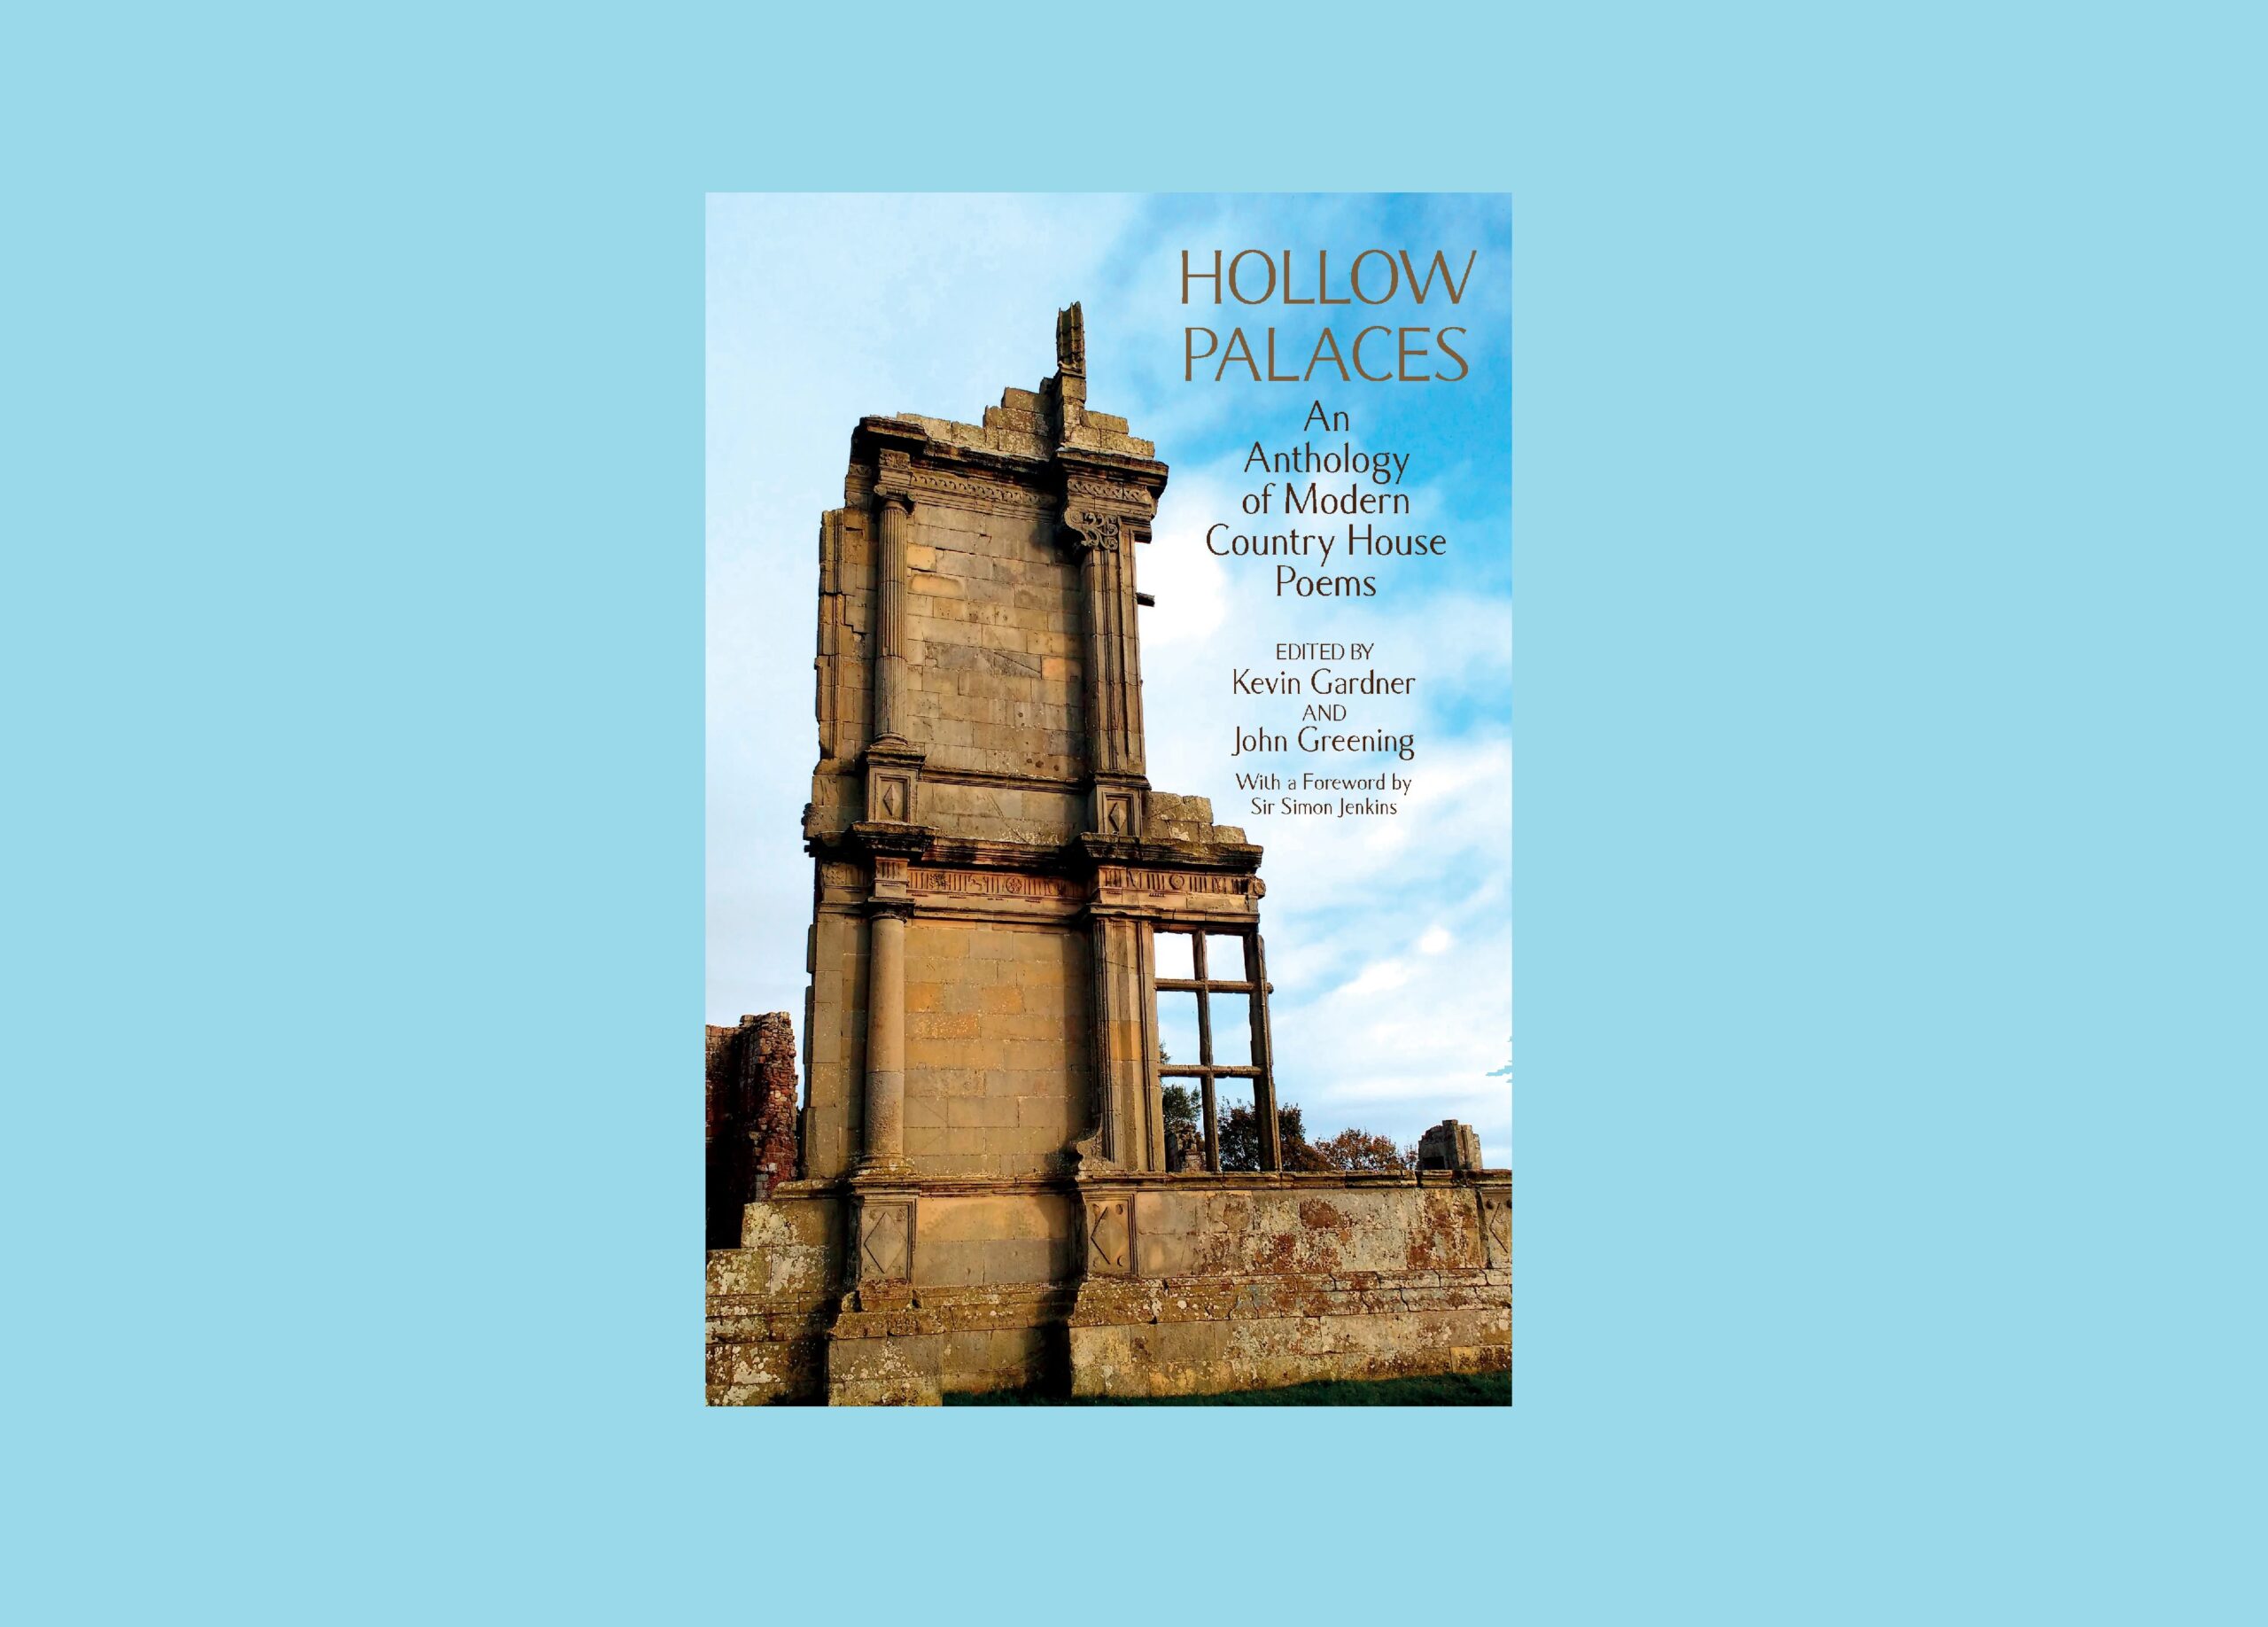 On ‘Hollow Palaces: An Anthology of Modern Country House Poems’